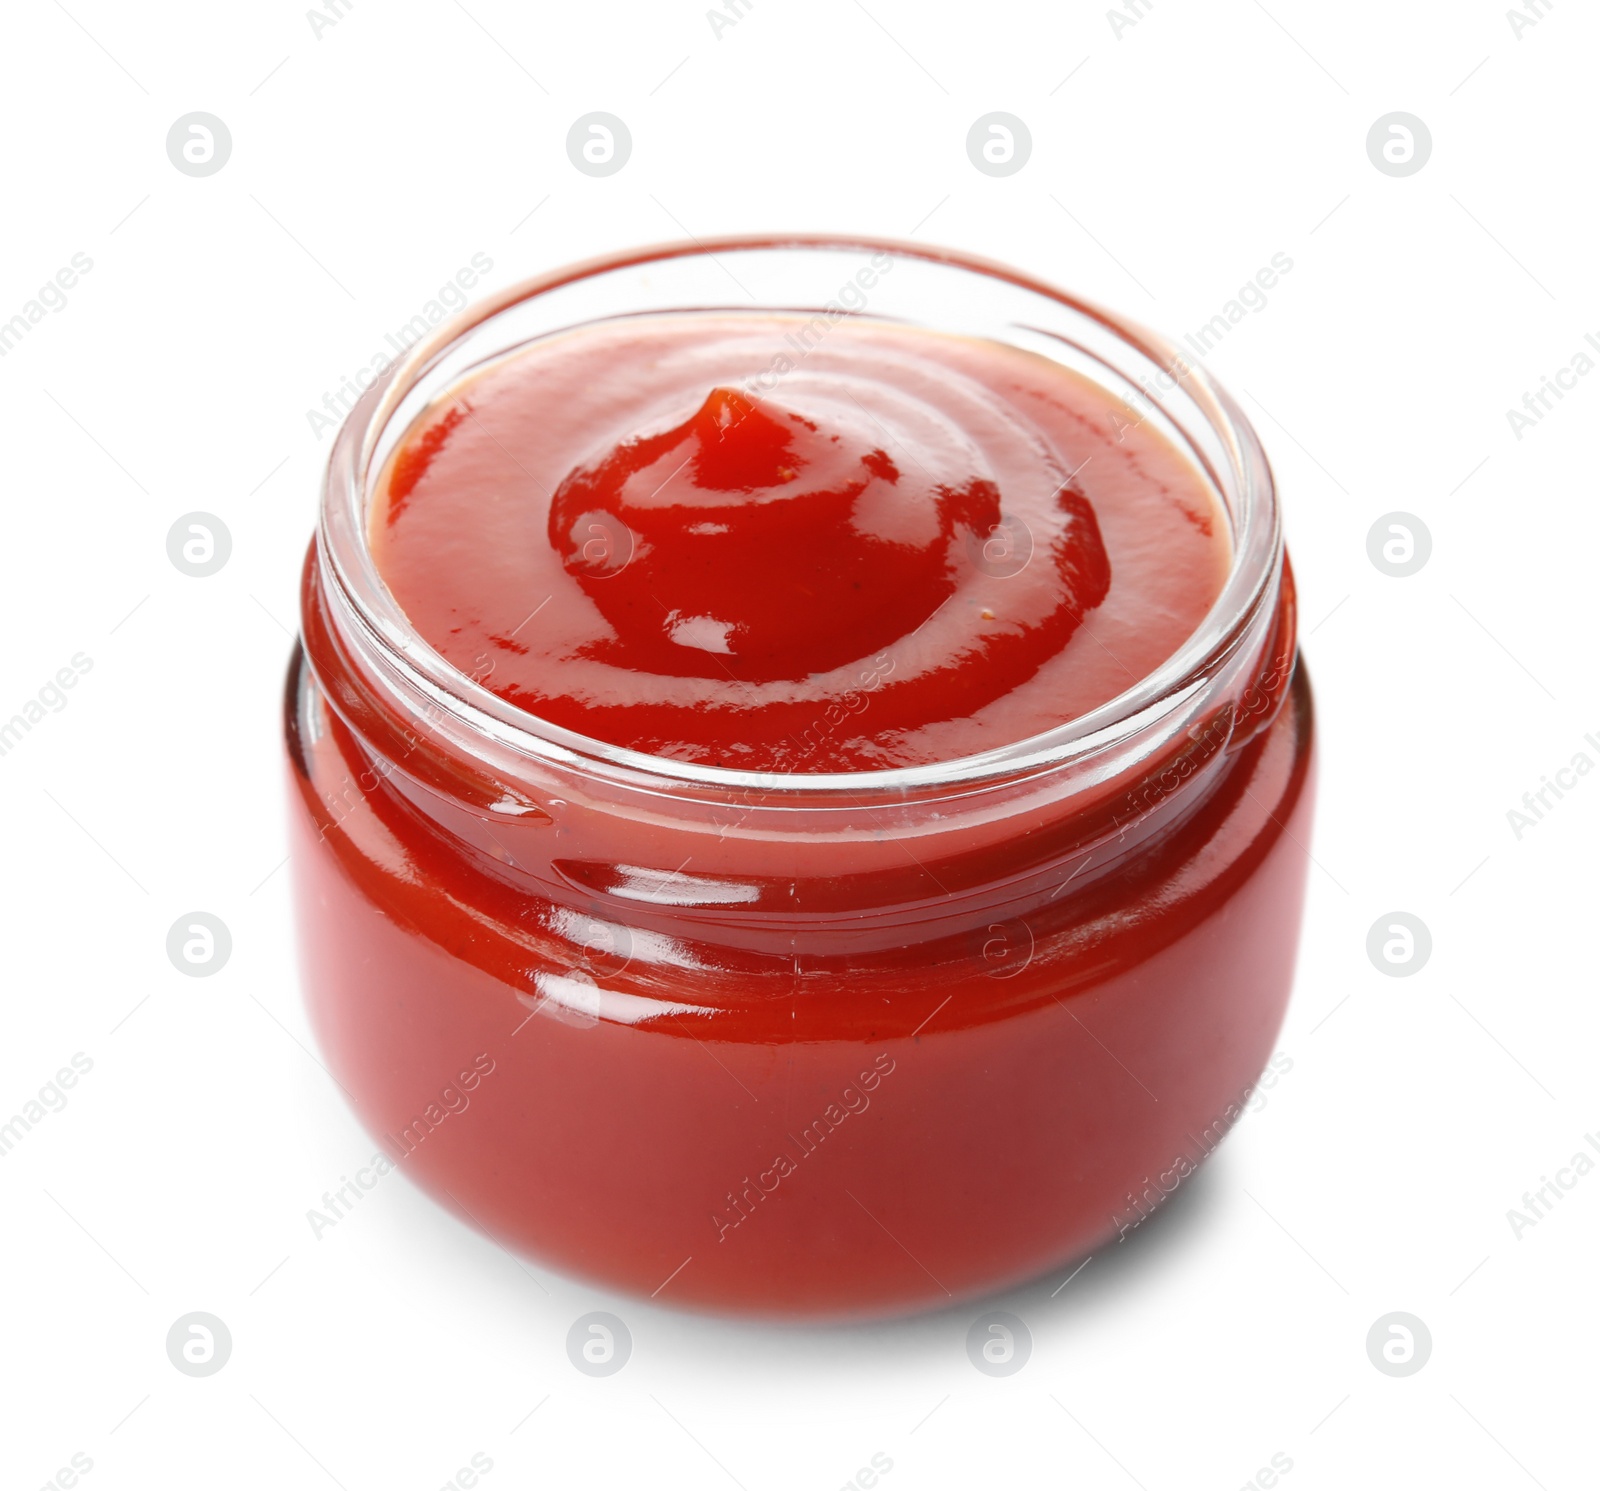 Photo of Tasty homemade tomato sauce in glass jar on white background